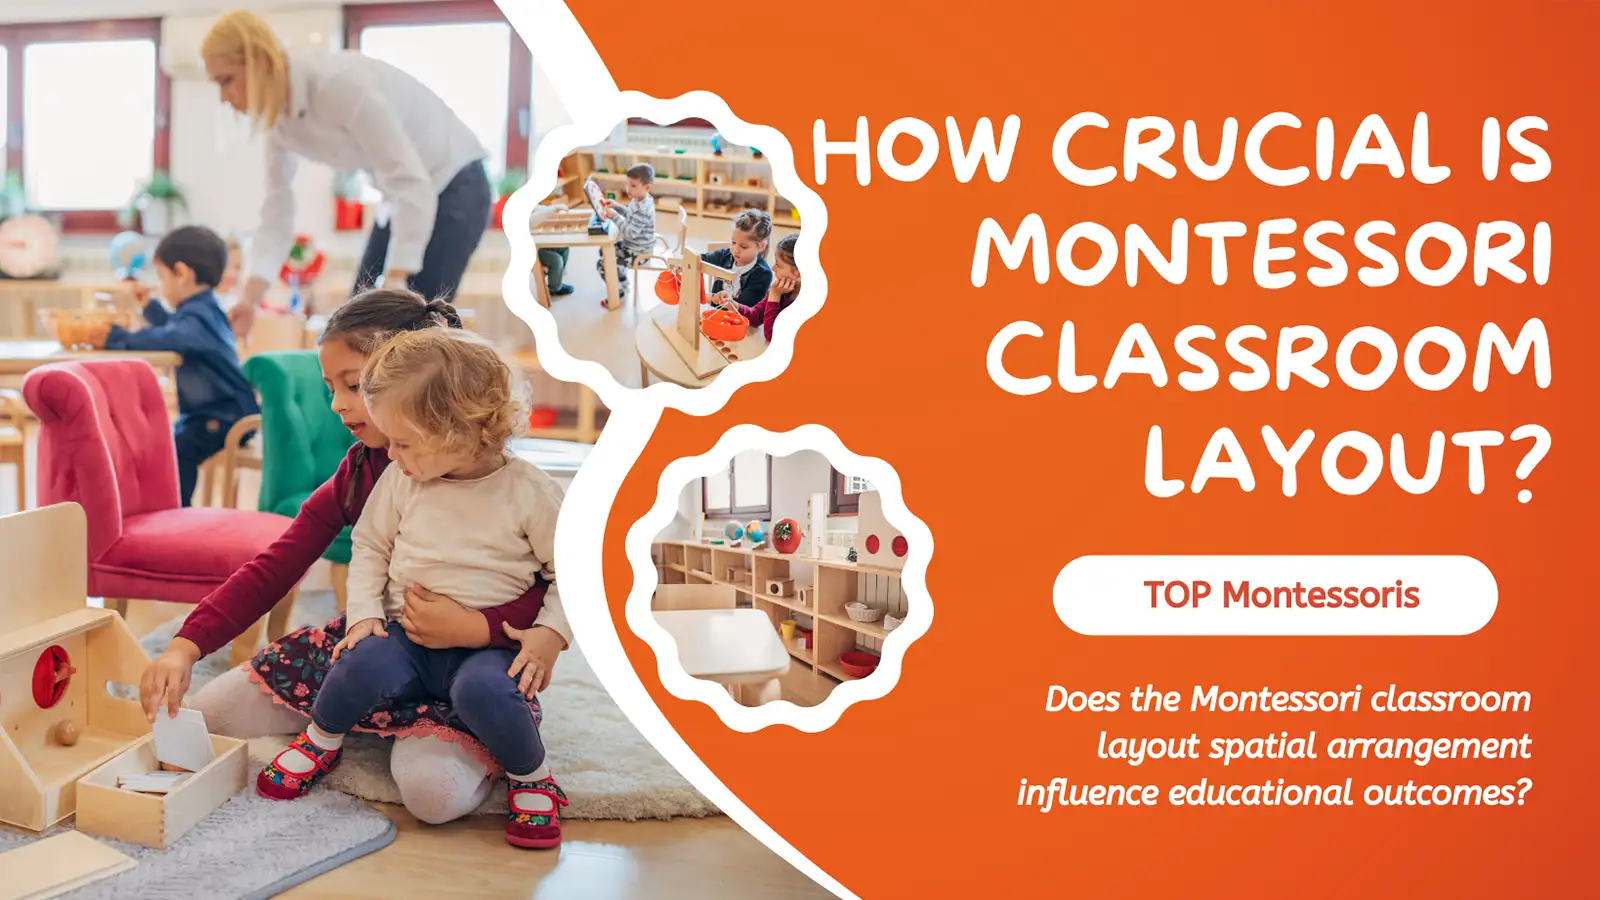 How Crucial is Montessori Classroom Layout